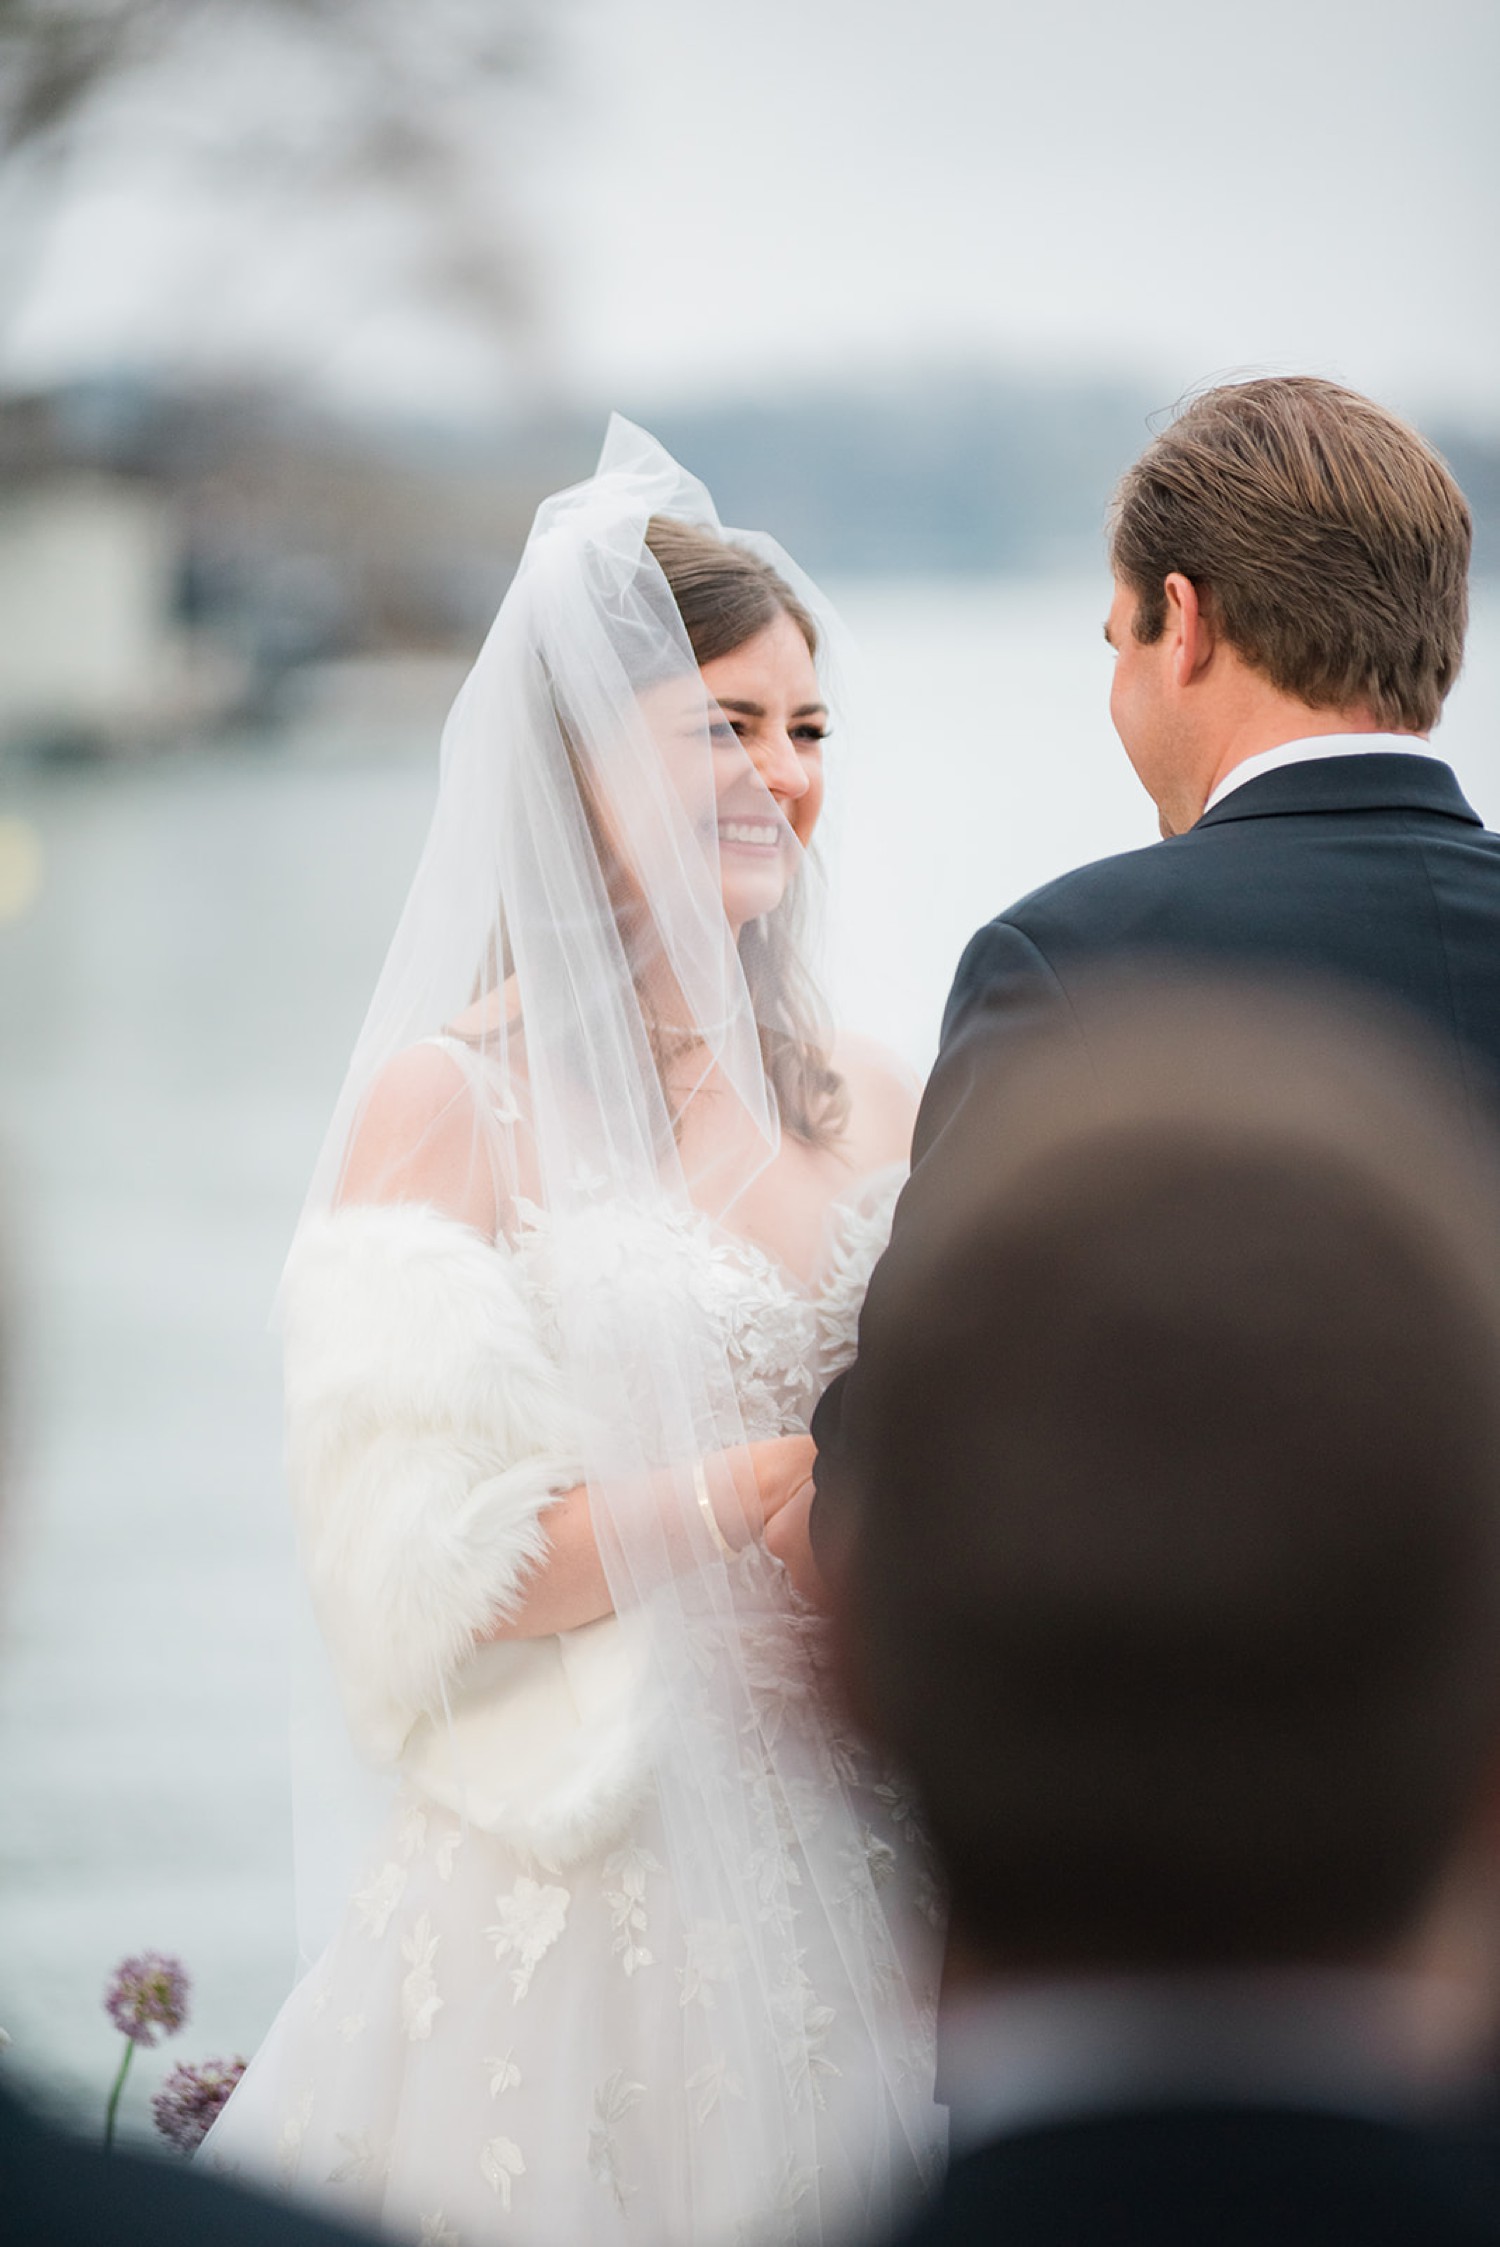 Bride smiling at groom during vows